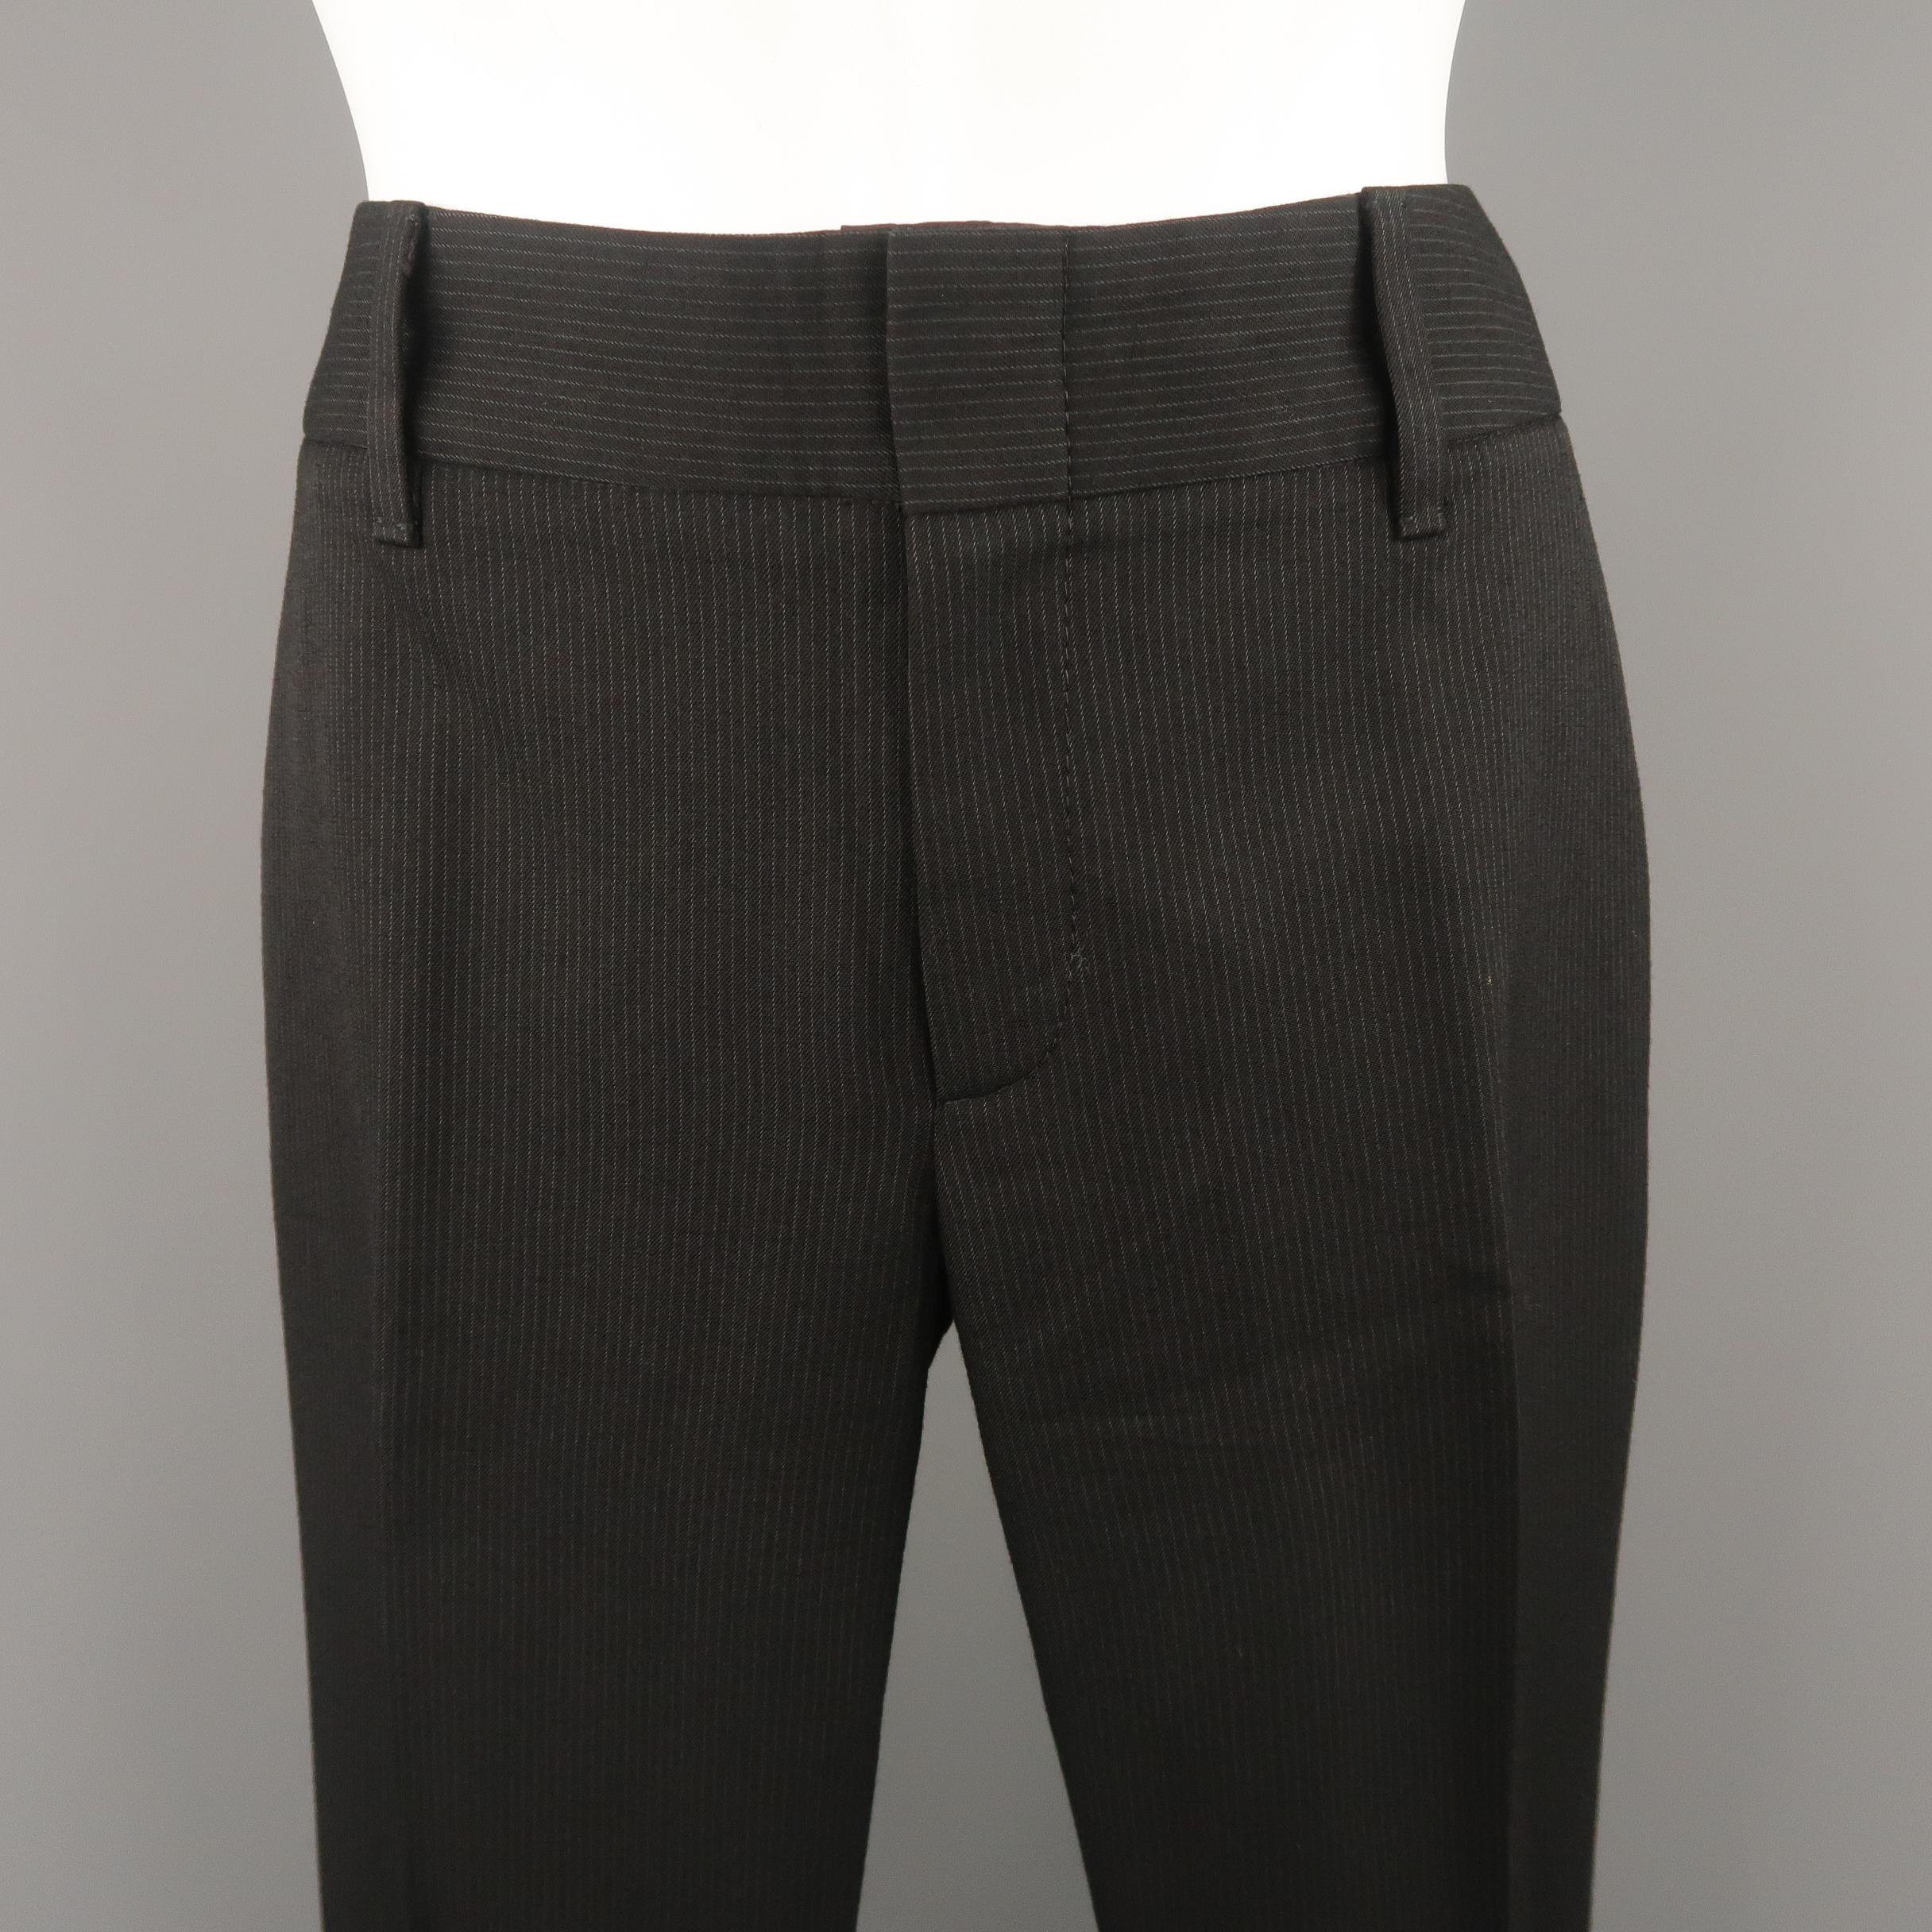 GUCCI dress pants come in black striped wool blend twill with a straight leg. Made in Italy.
 
Excellent Pre-Owned Condition.
Marked: IT 38
 
Measurements:
 
Waist: 30 in.
Rise: 8.5 in.
Inseam: 30 in.